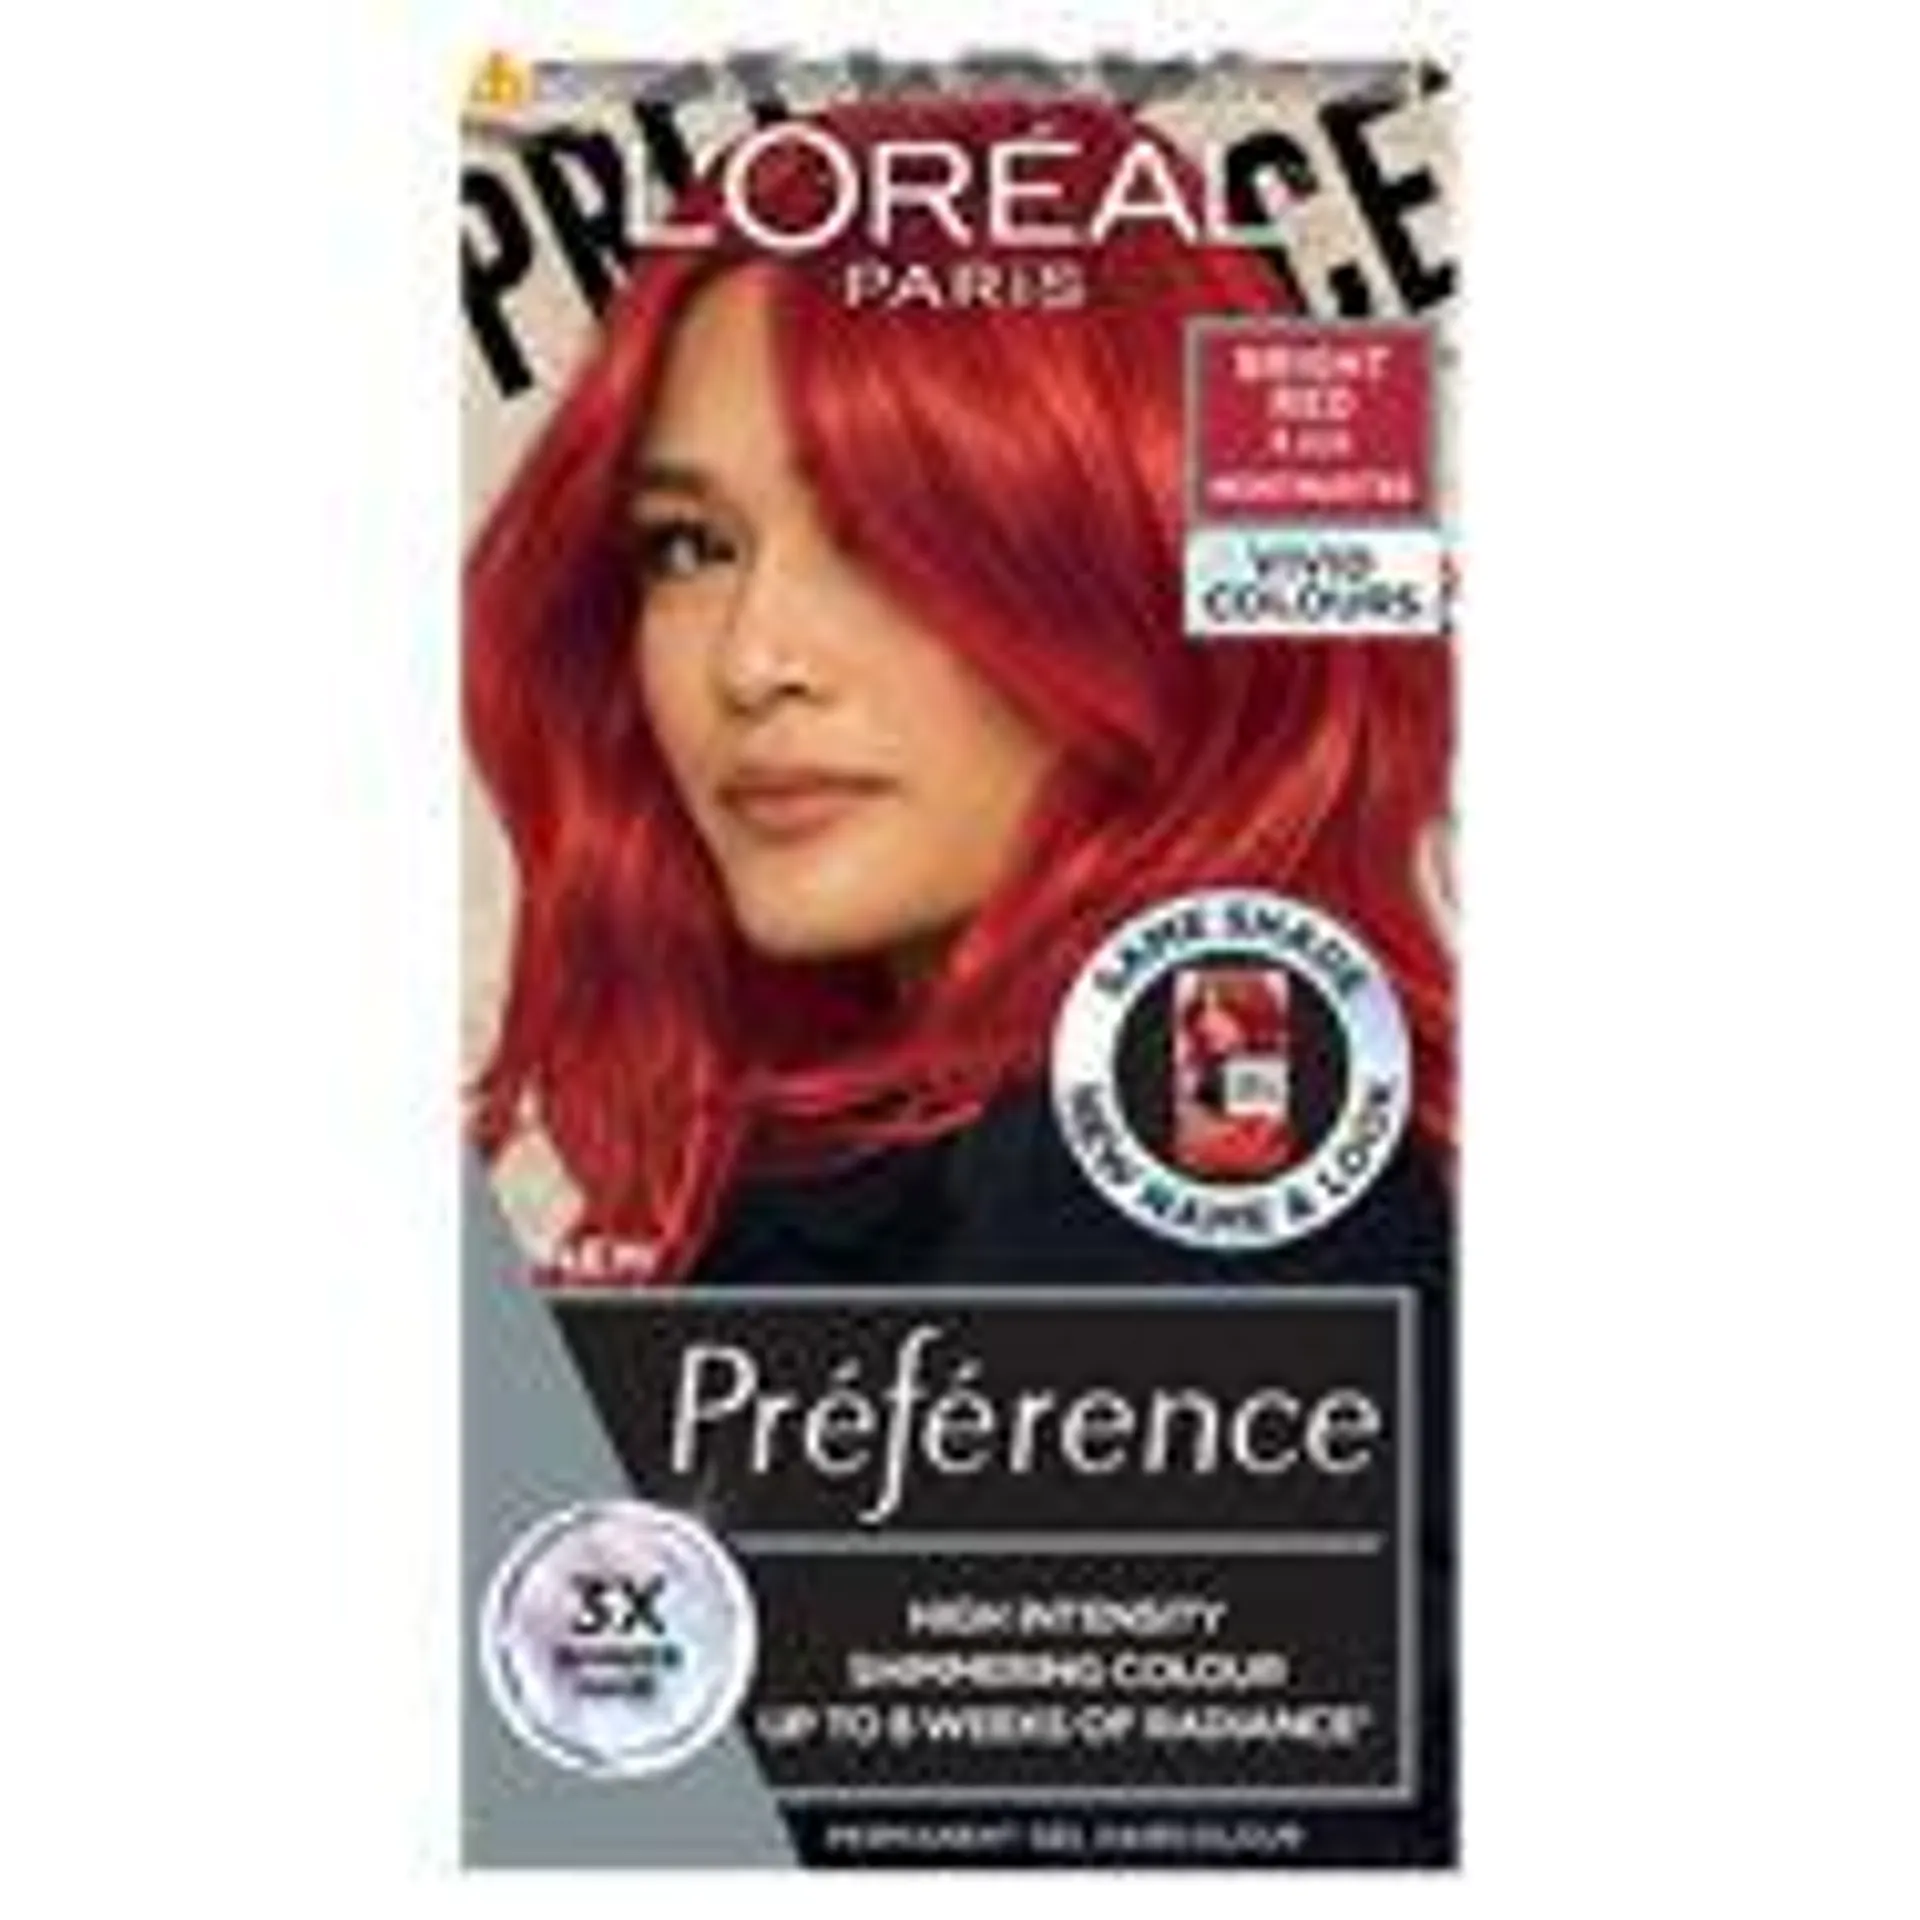 L'Oreal Preference Vivids (Colorista) Permanent Gel Hair Dye Bright Red 8.624